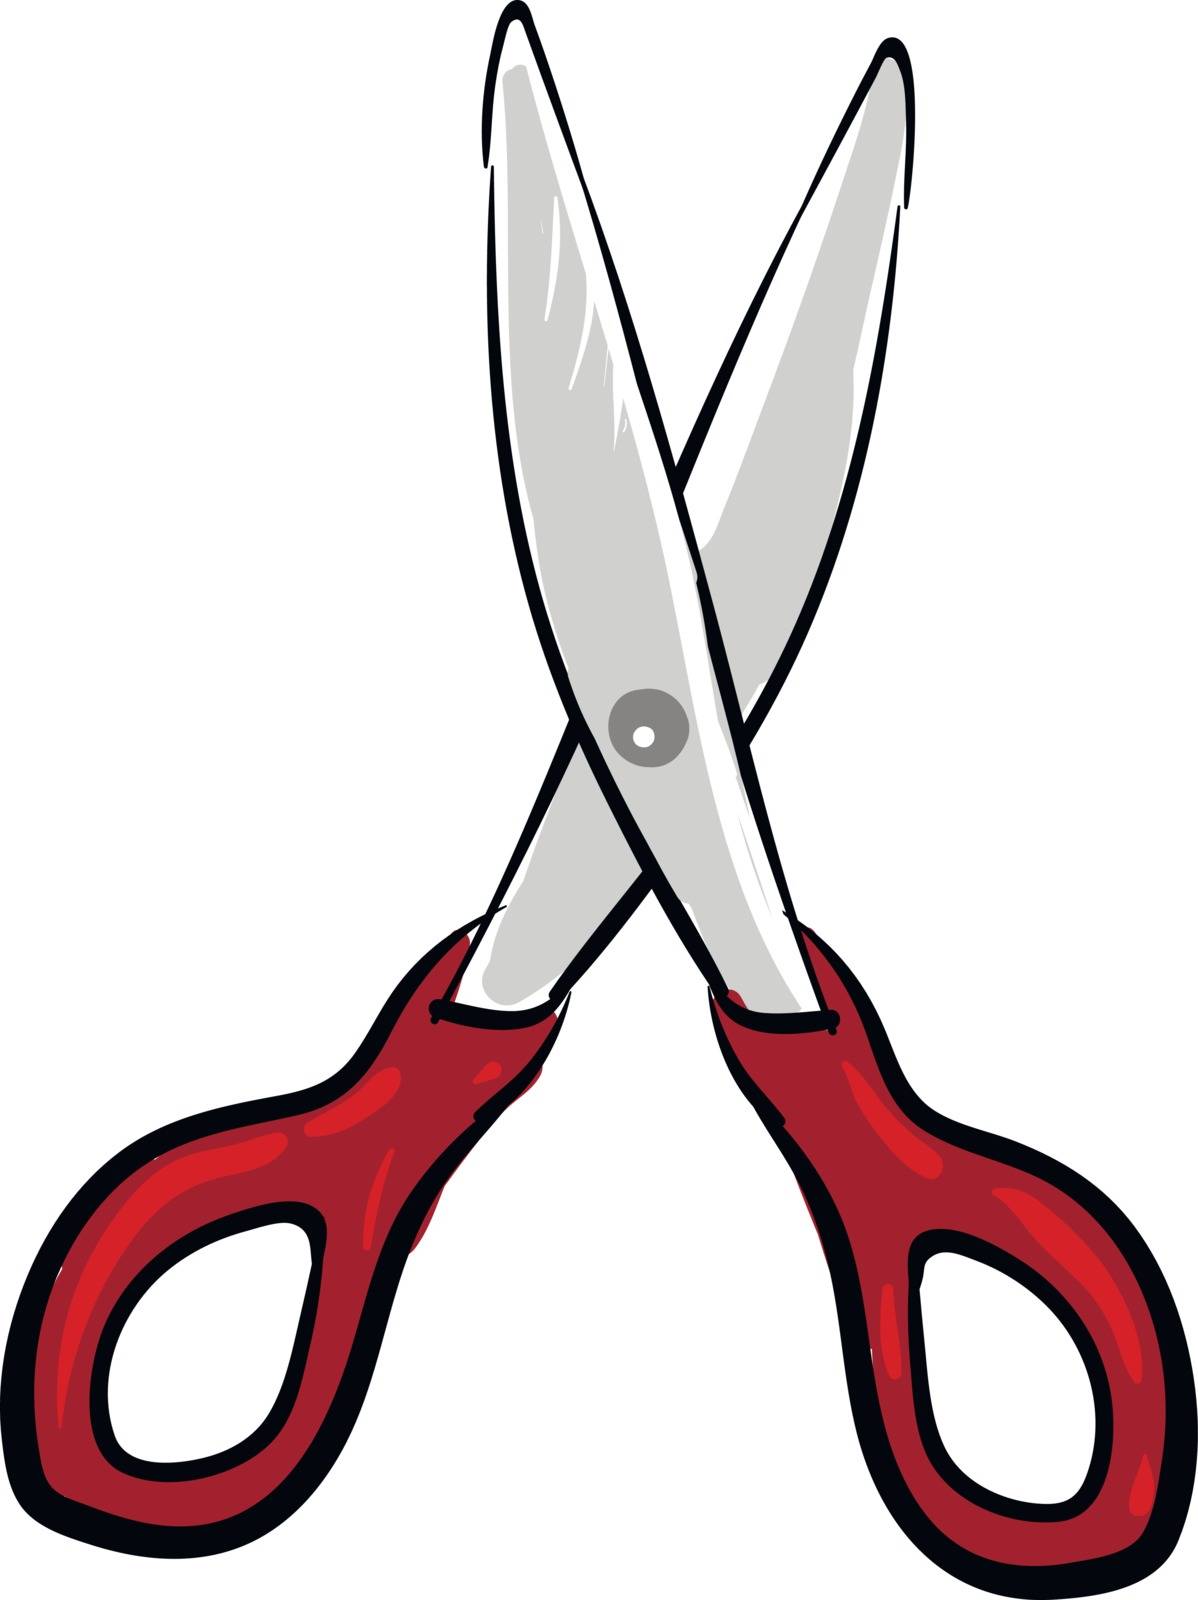 Red 2 scissors, vector or color illustration.  by Morphart